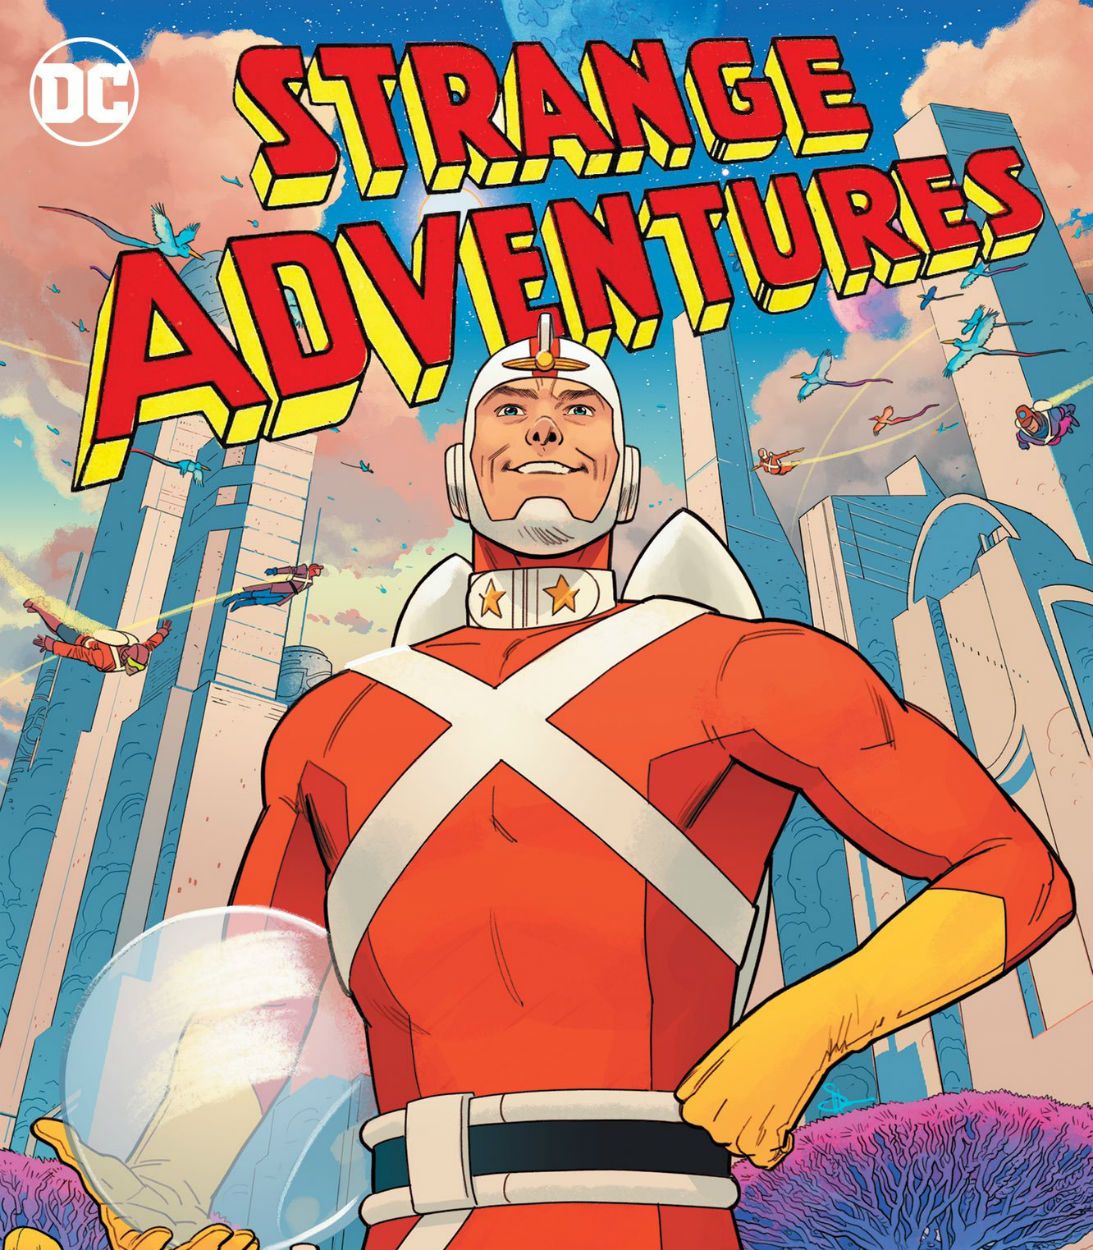 DC's Strange Adventures TV show coming to HBO Max